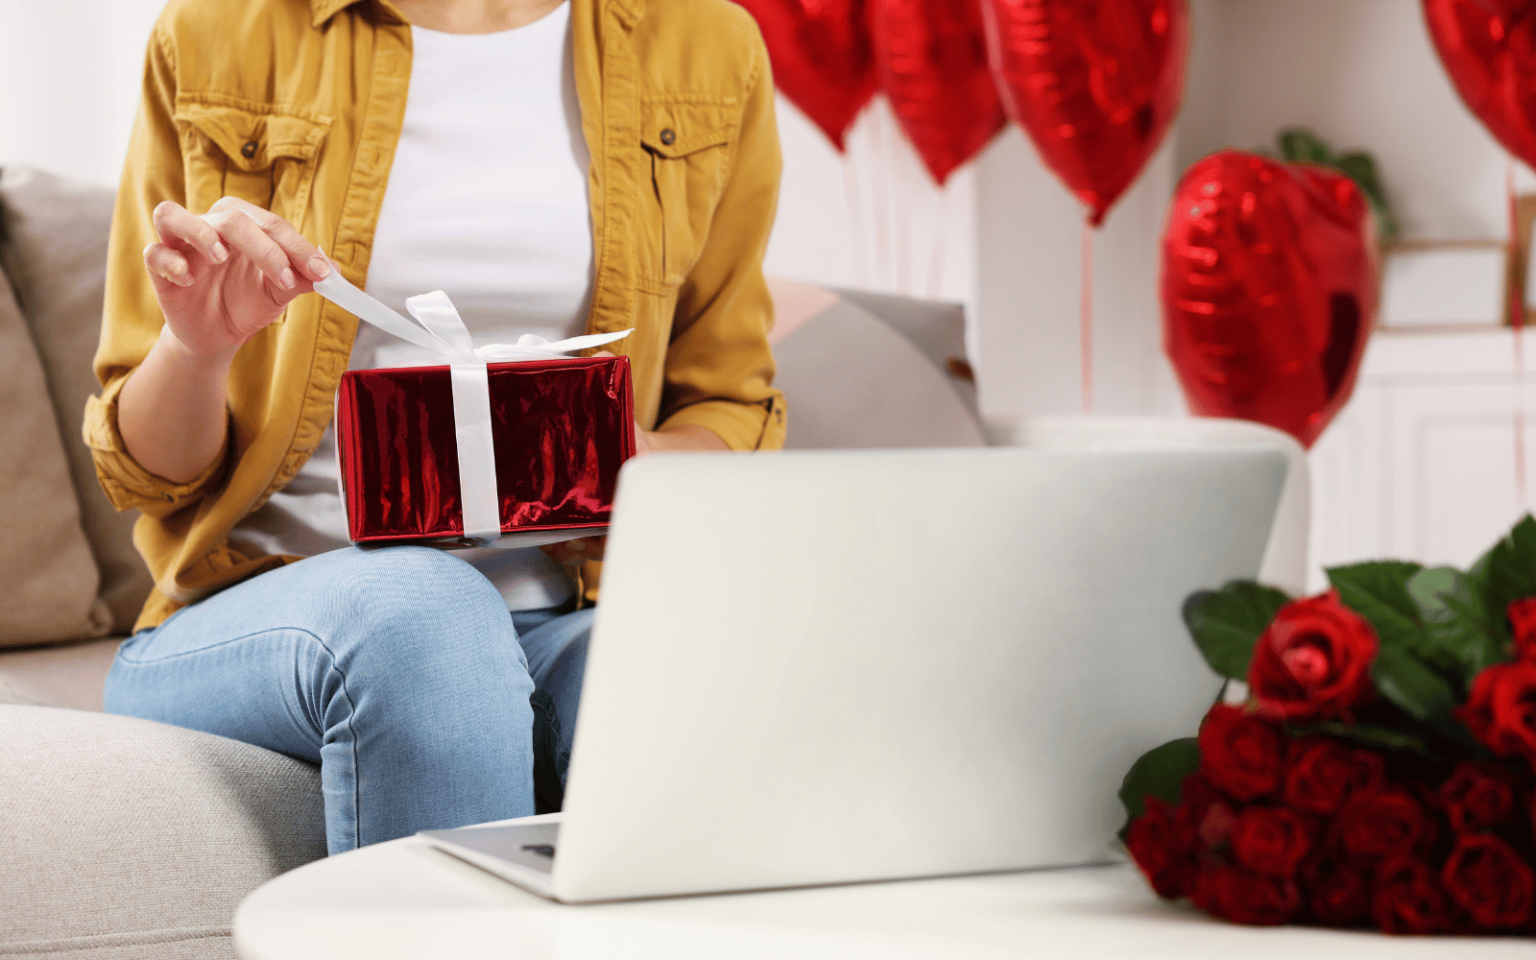 Techy Valentine's Day gifts for her